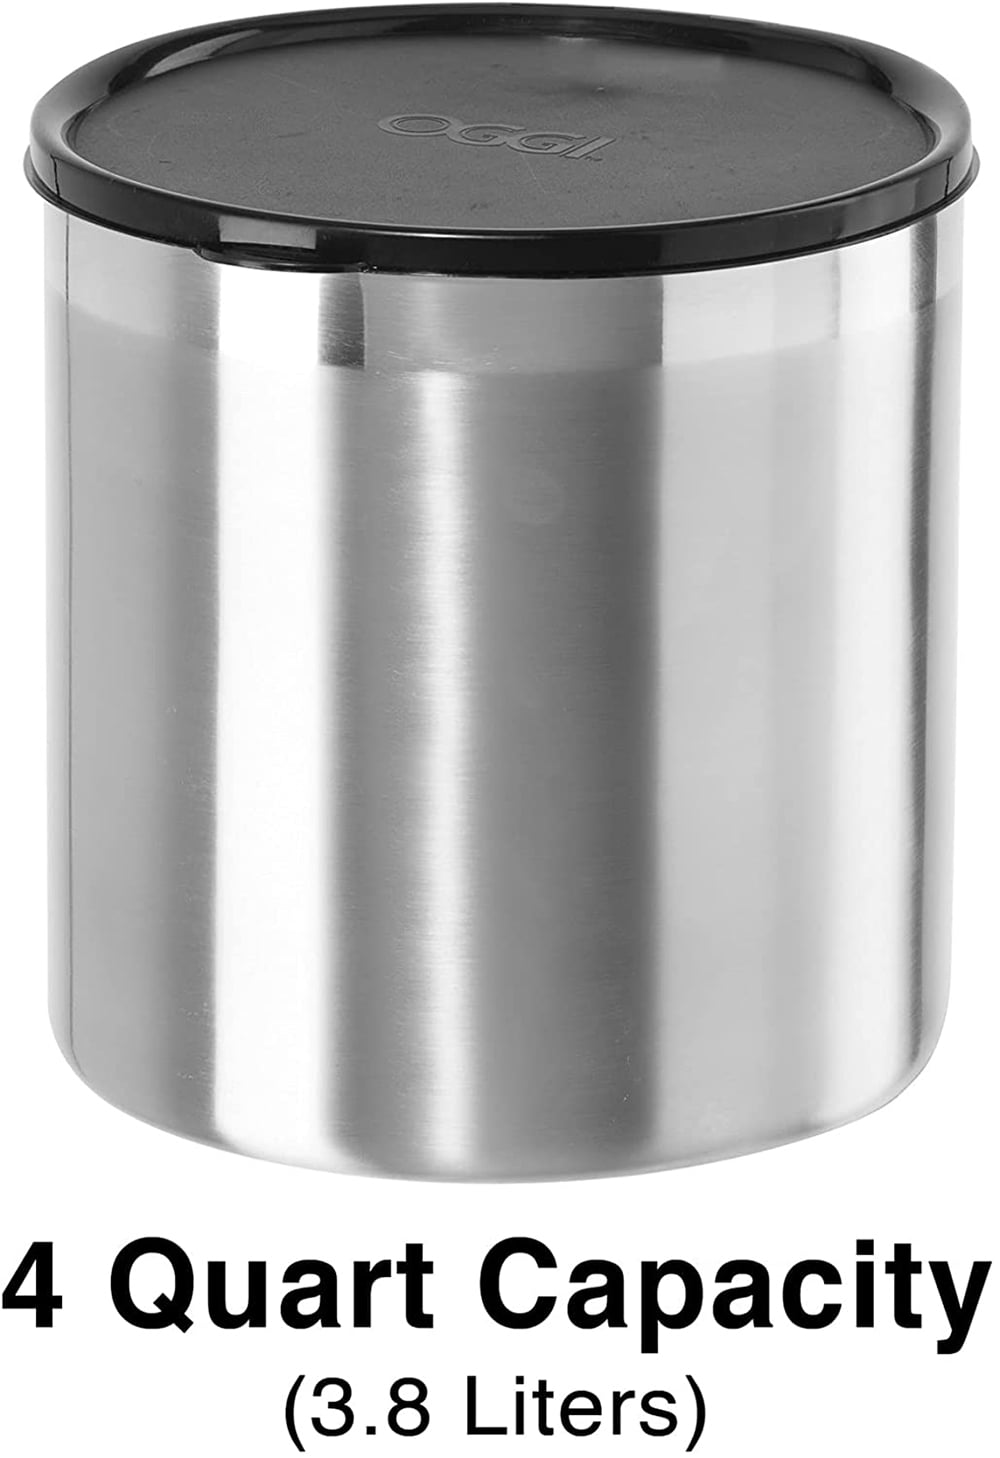 OGGI, Kitchen, Oggi Stainless Steel 4qt Grease Can Wstrainer And Lid